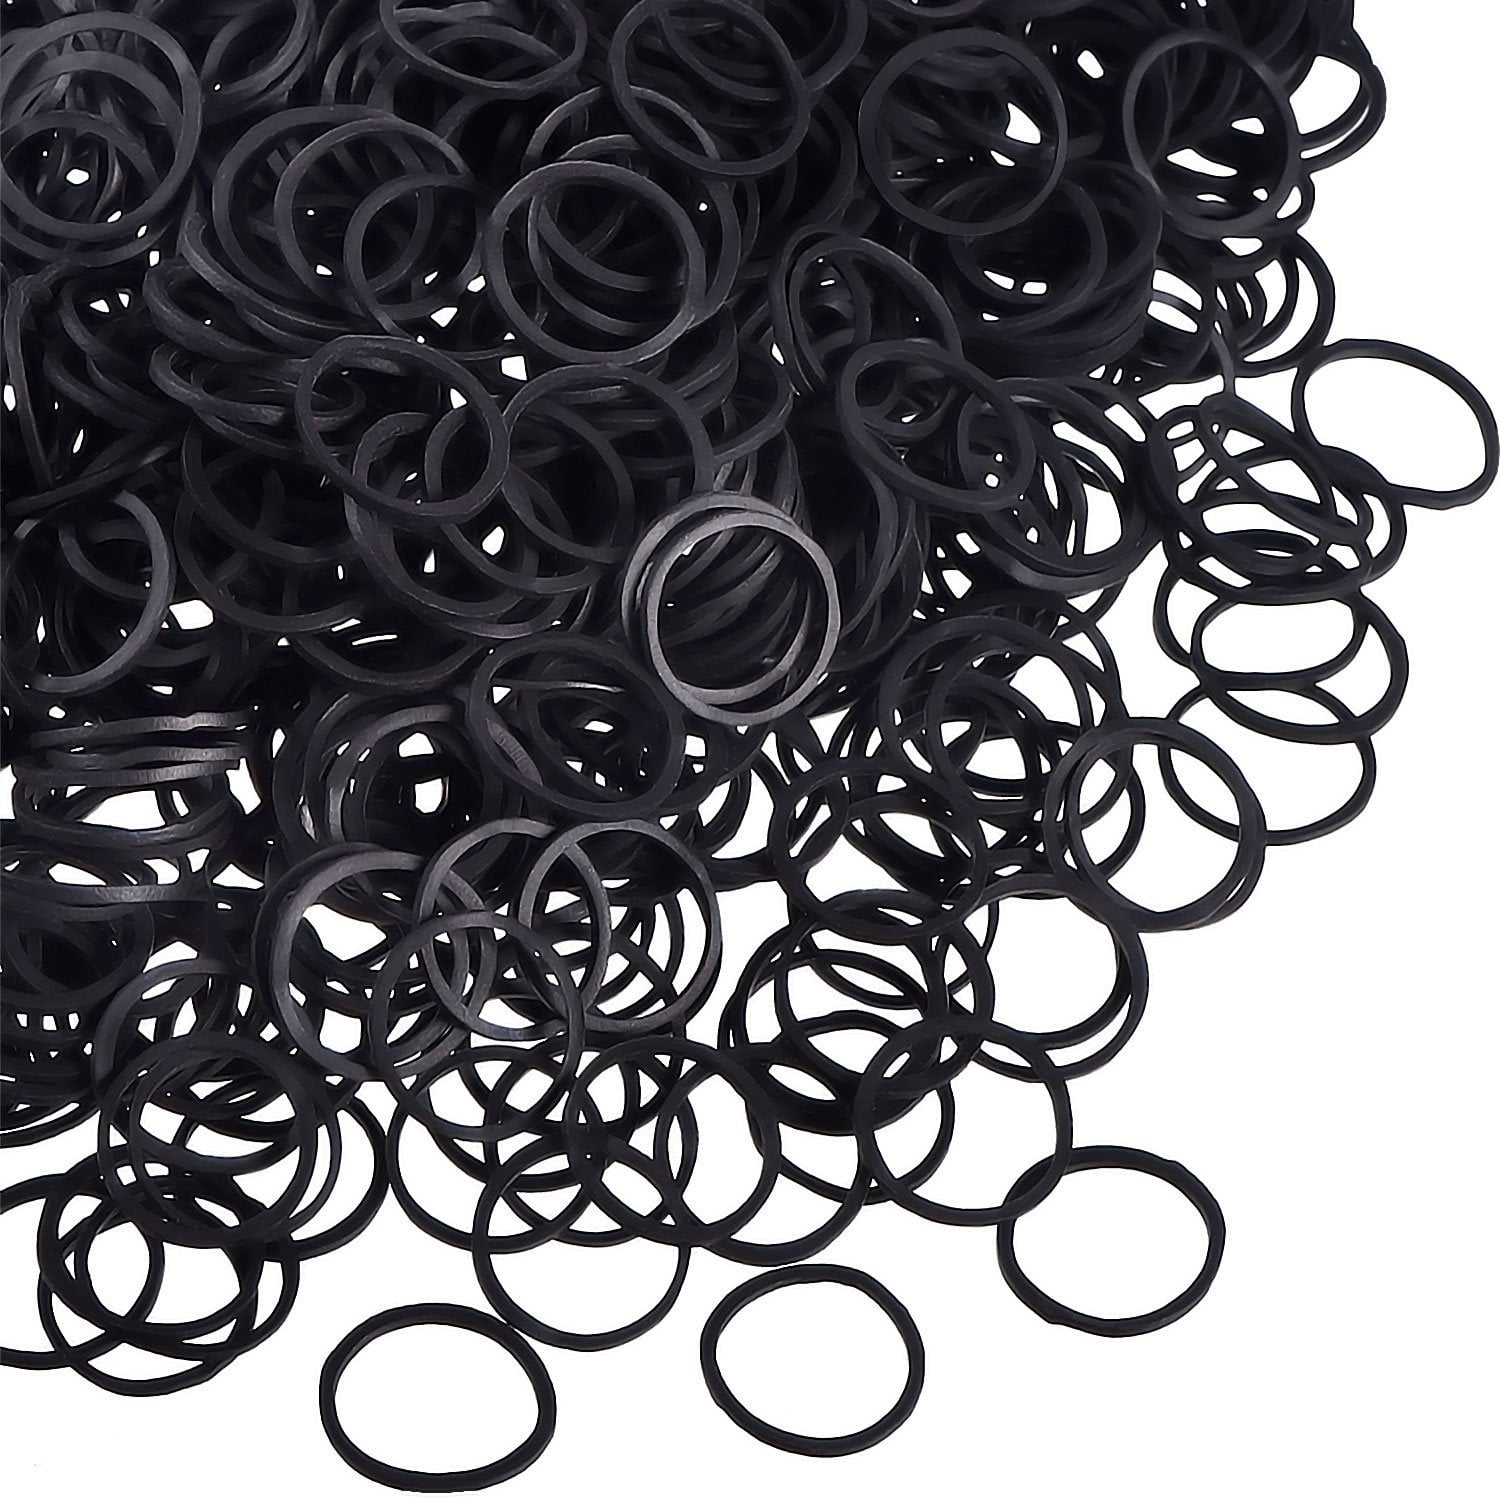 Brussels08 1000Pcs Mini Rubber Bands Hair Tie Small Braiding Bands Mini Hair Elastic Bands Ponytail Holder Hair Ropes Rings for Girls Black